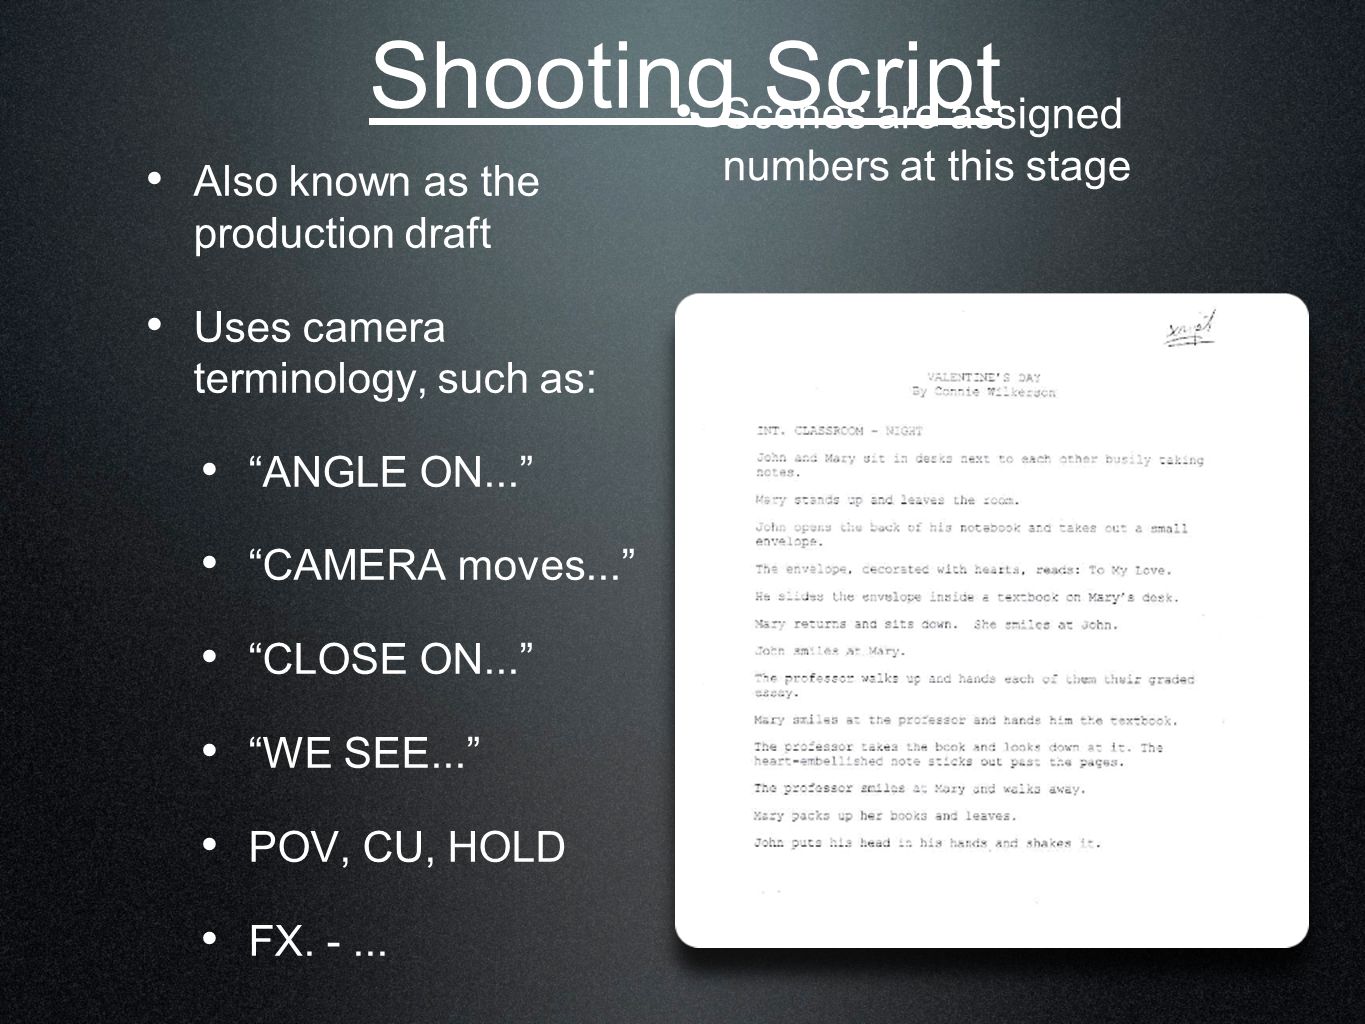 Shooting Script Also known as the production draft Uses camera terminology, such as: ANGLE ON... CAMERA moves... CLOSE ON... WE SEE... POV, CU, HOLD FX.